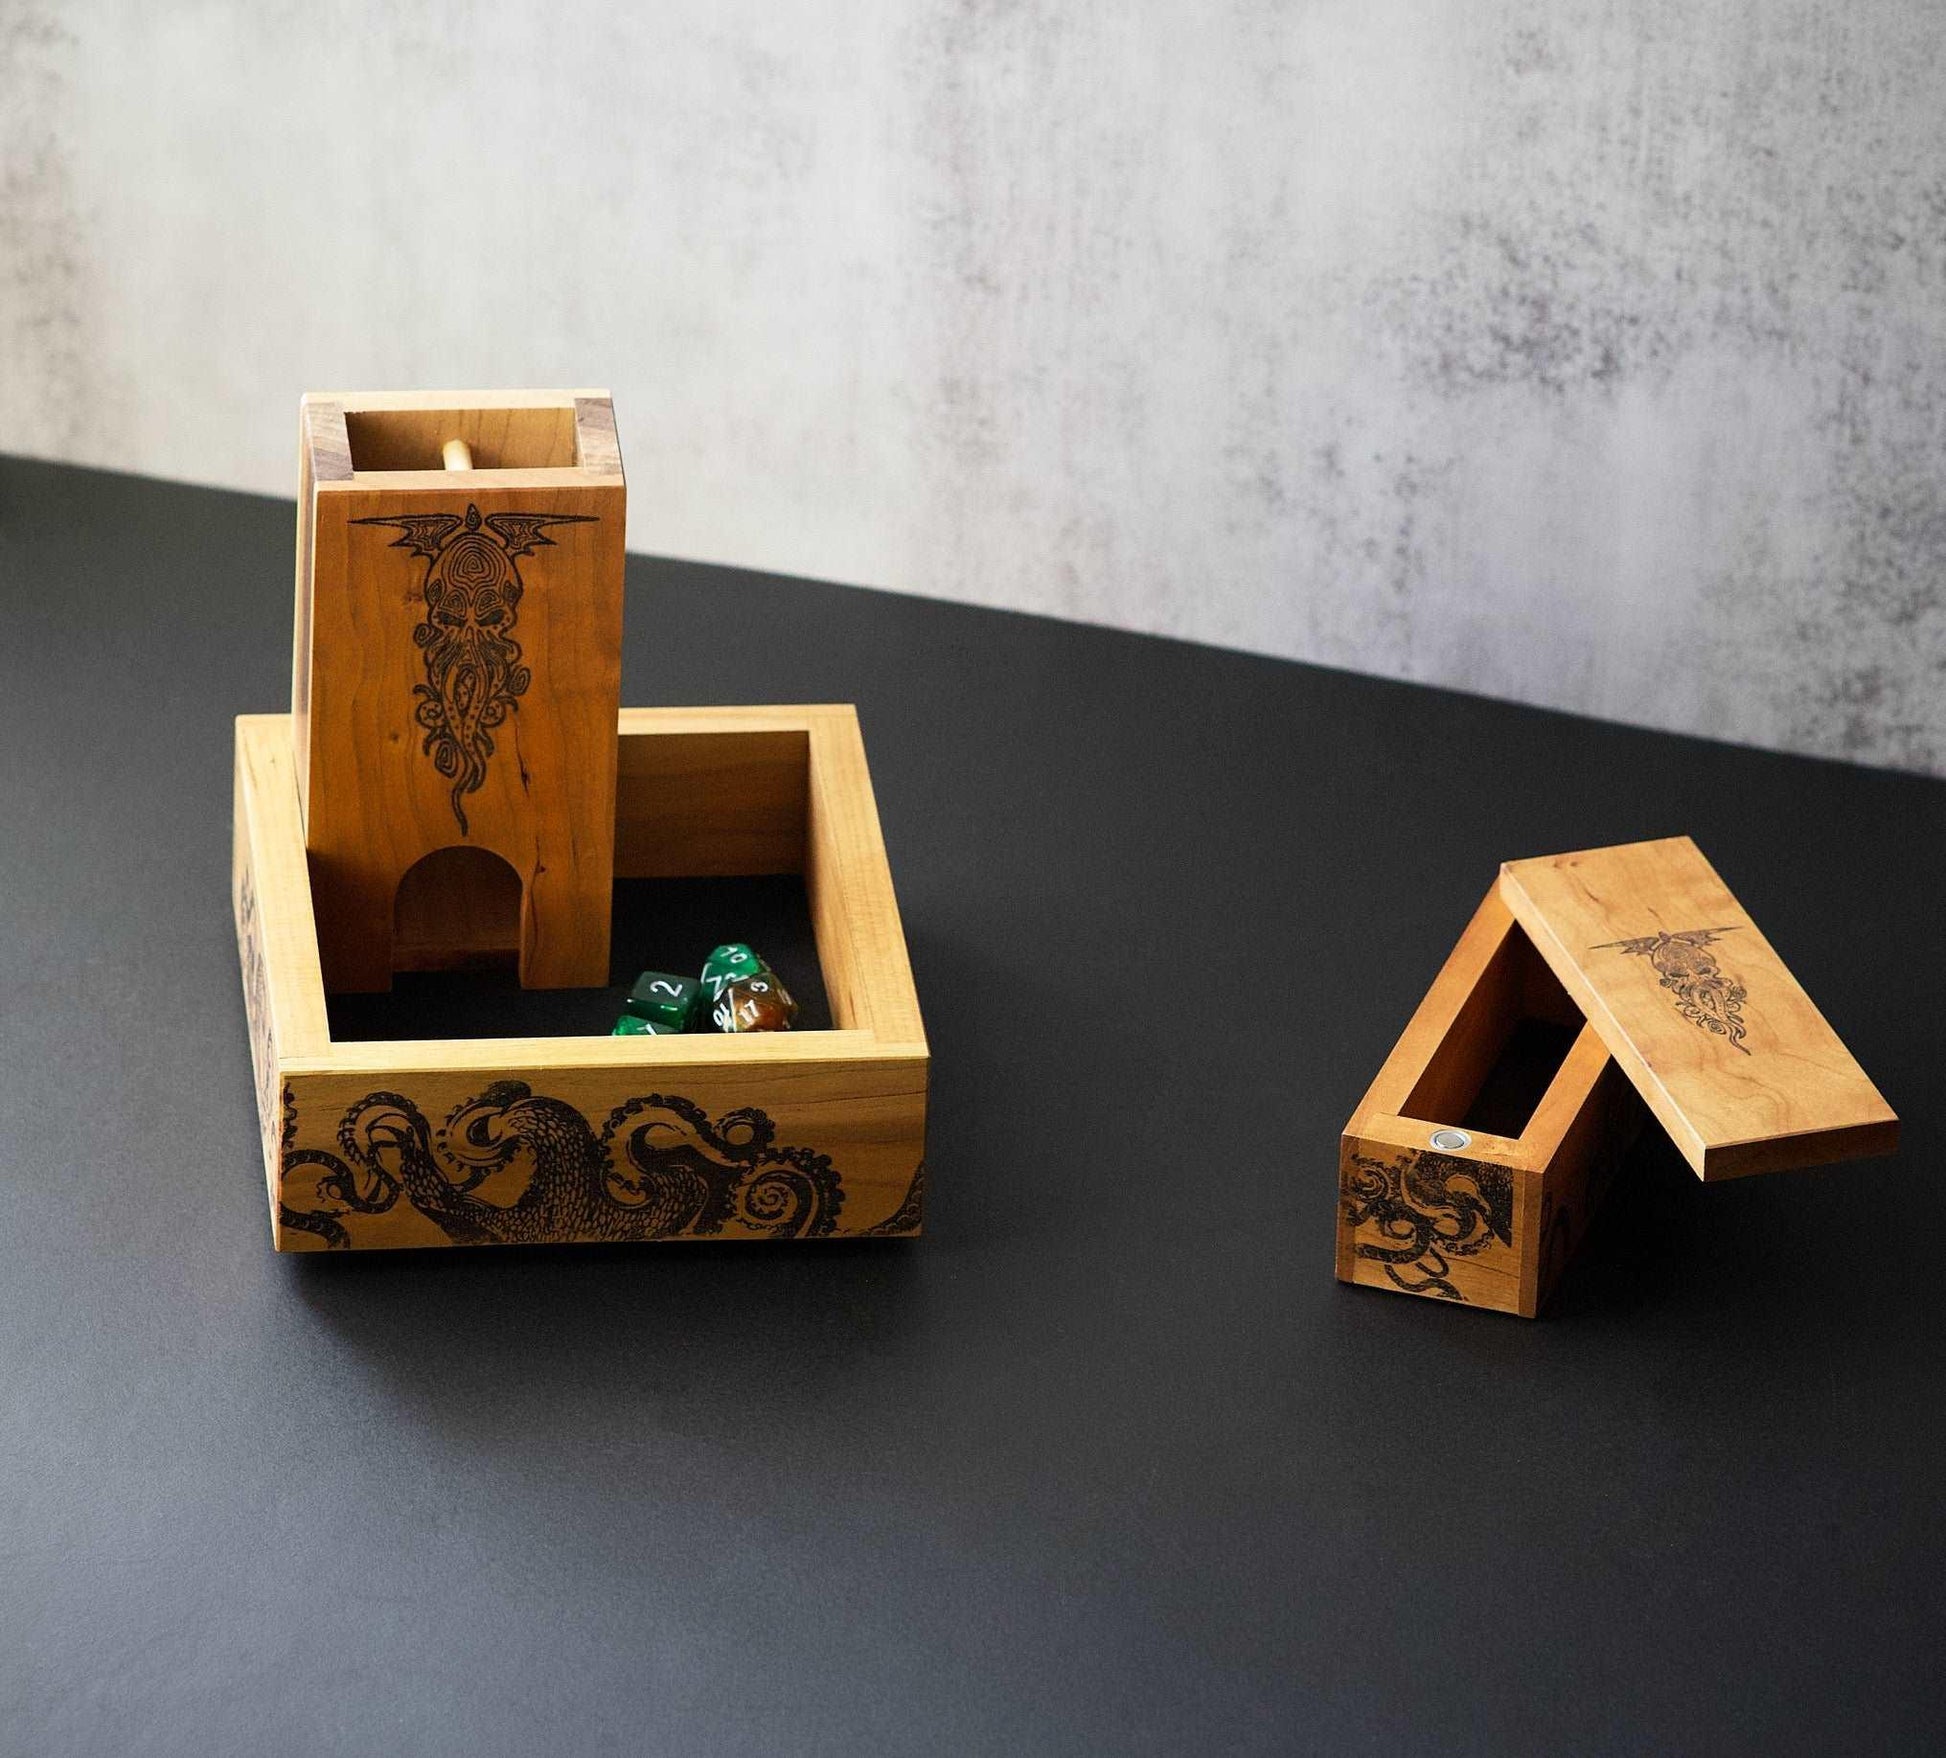 Small Cherry and Walnut Wooden Dice Tower With Cthulhu - Dragon Armor Games